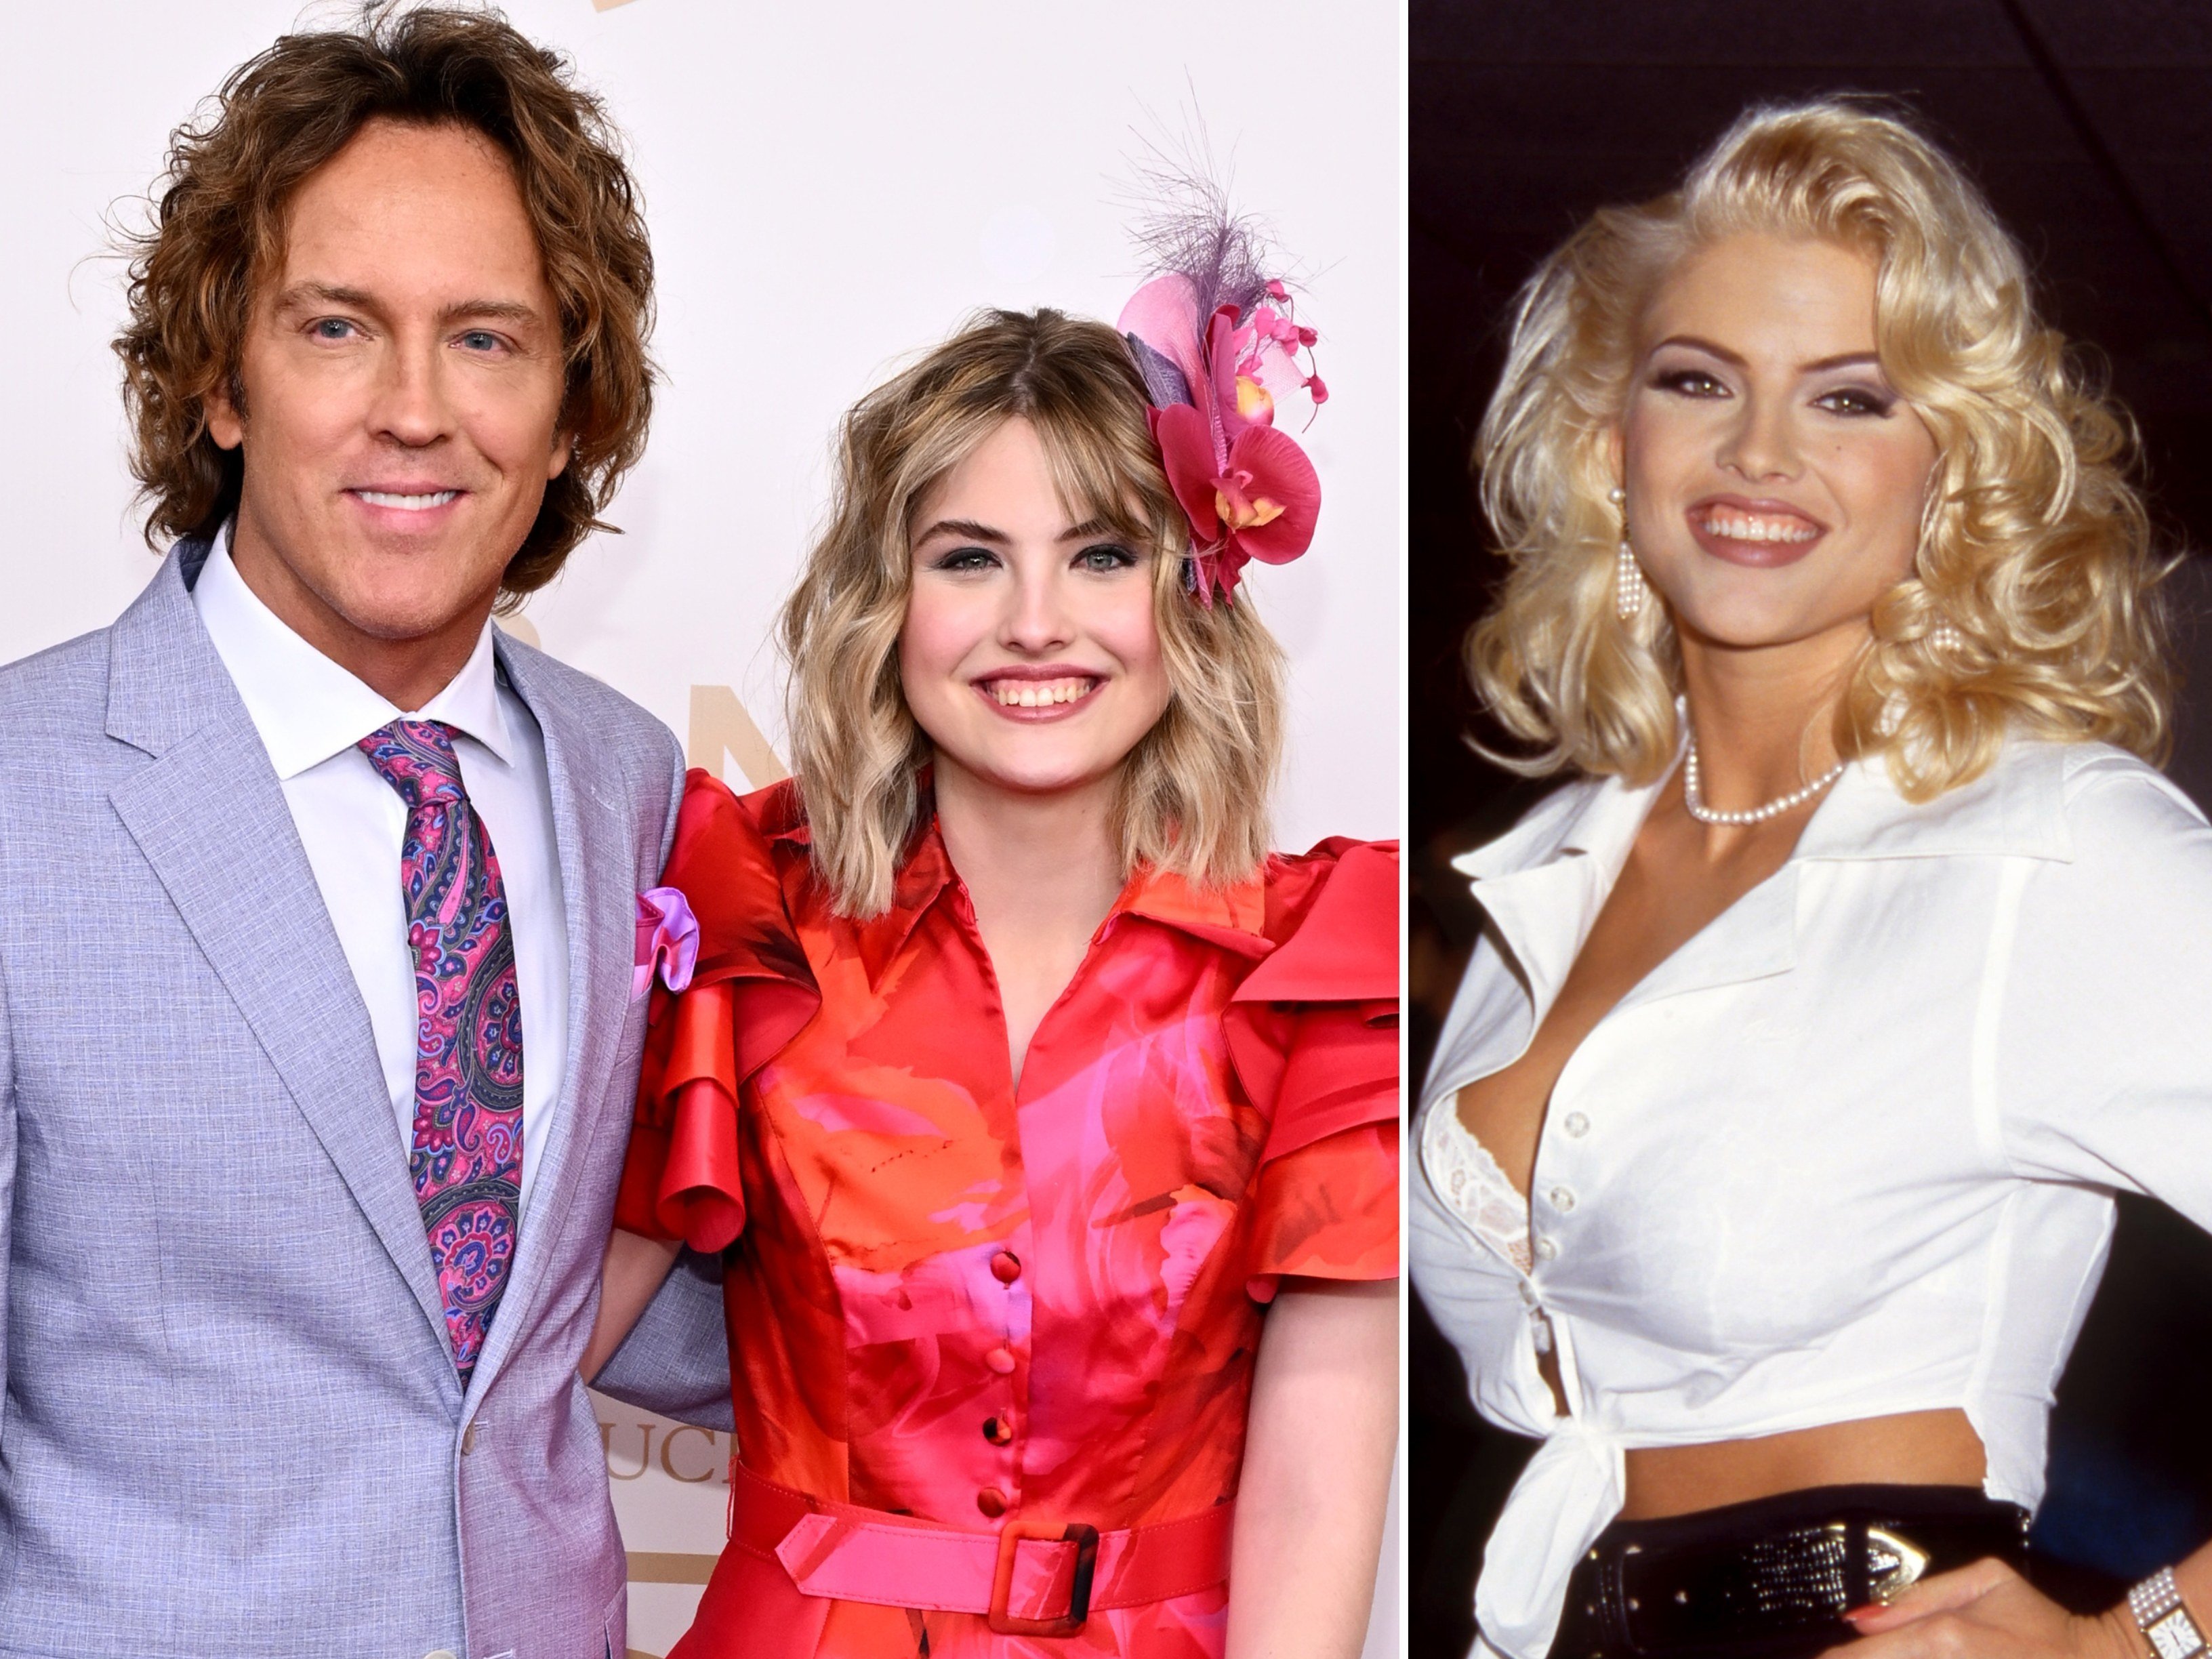 Dannielynn Birkhead is the daughter of late Playboy model Anna Nicole Smith and Larry Birkhead. Photos: Getty Images